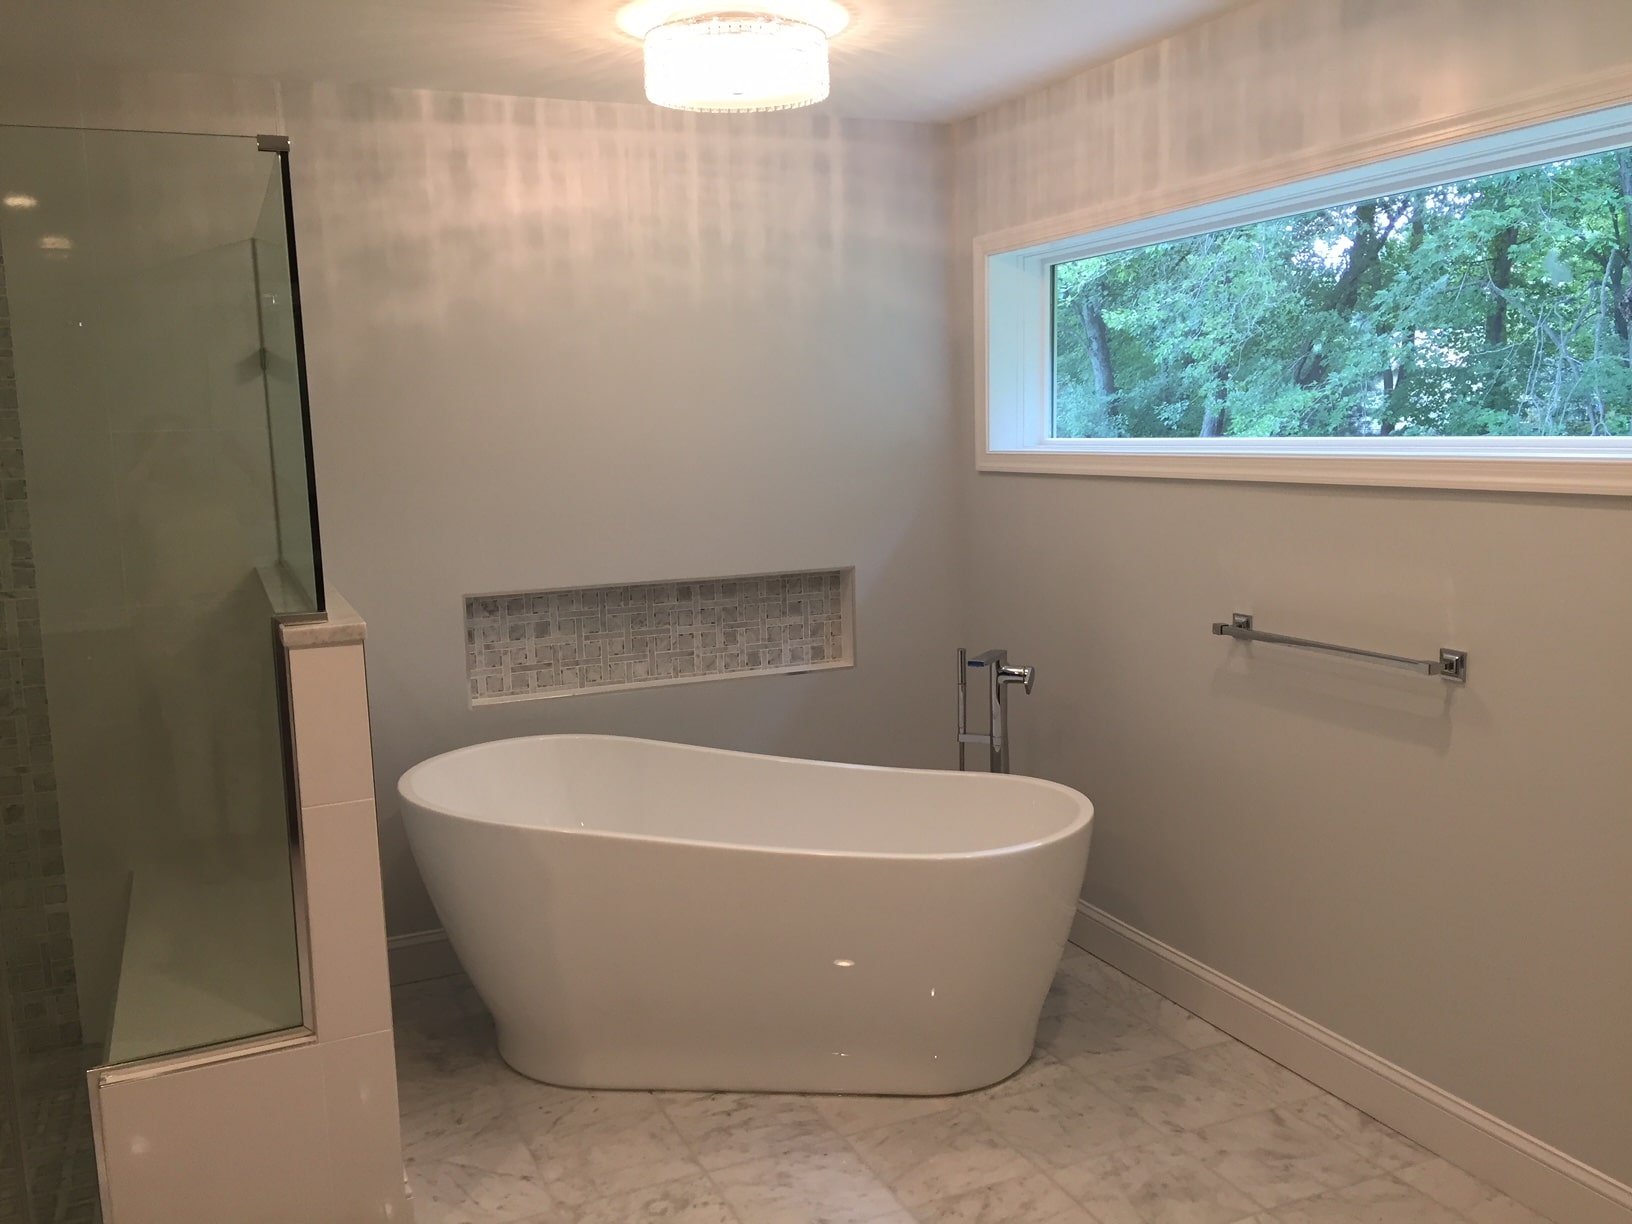 a bathroom with a standalone bathtub and shower in it